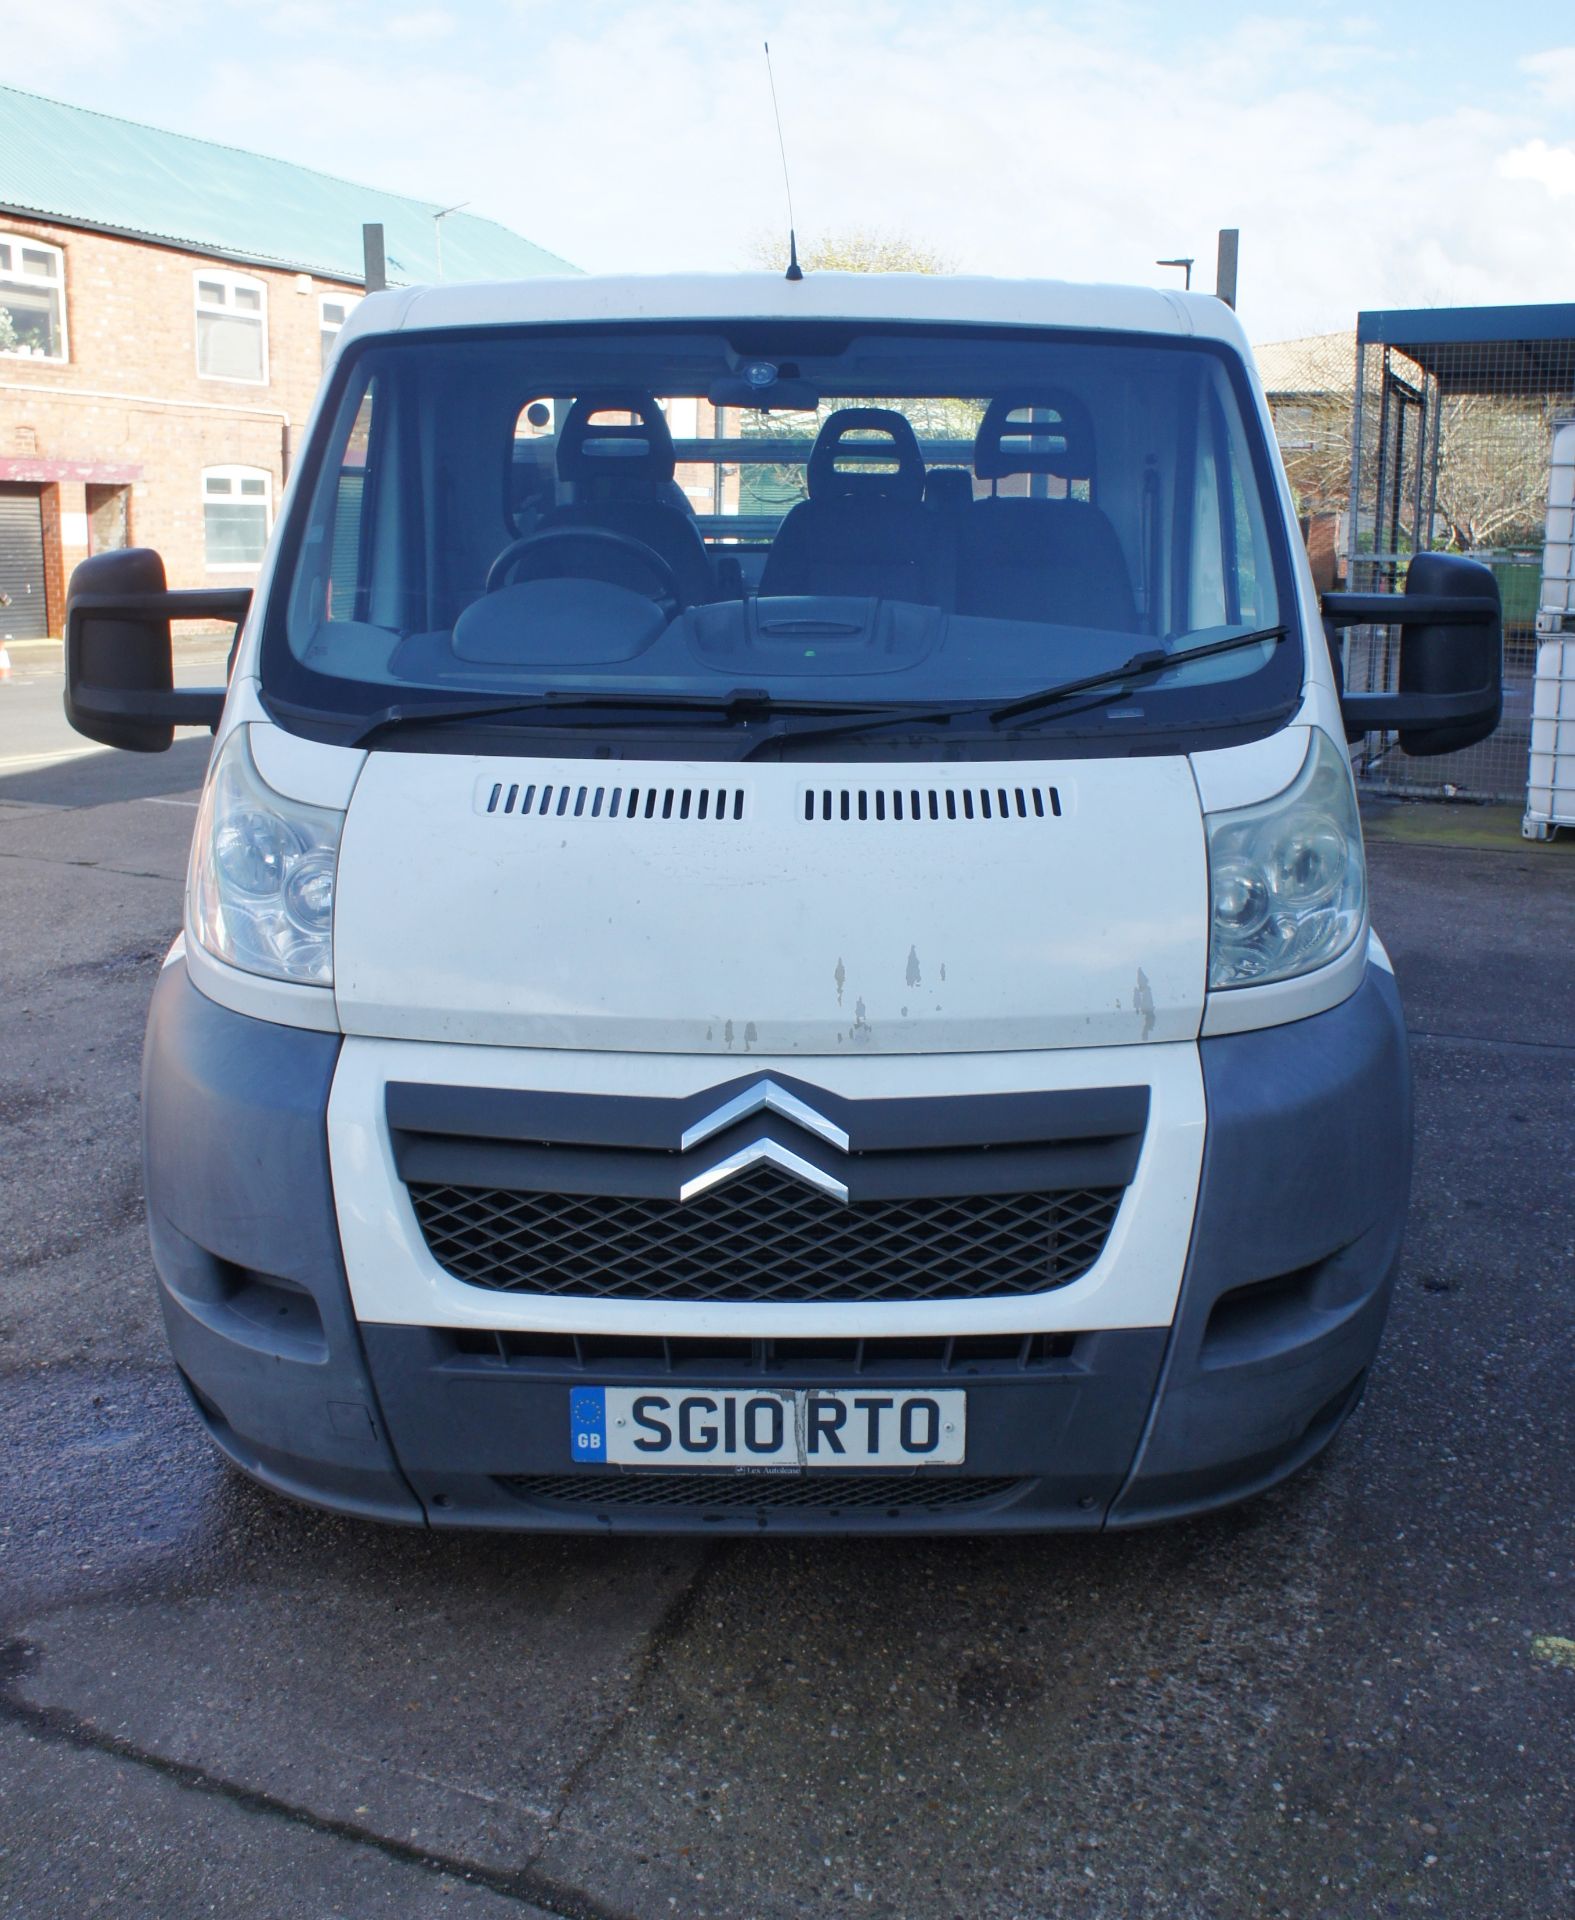 Citroen Relay 35 HDI 120, LWB dropside, Registration no. SG10 RTO, Date of registration: 03/06/2010, - Image 2 of 16